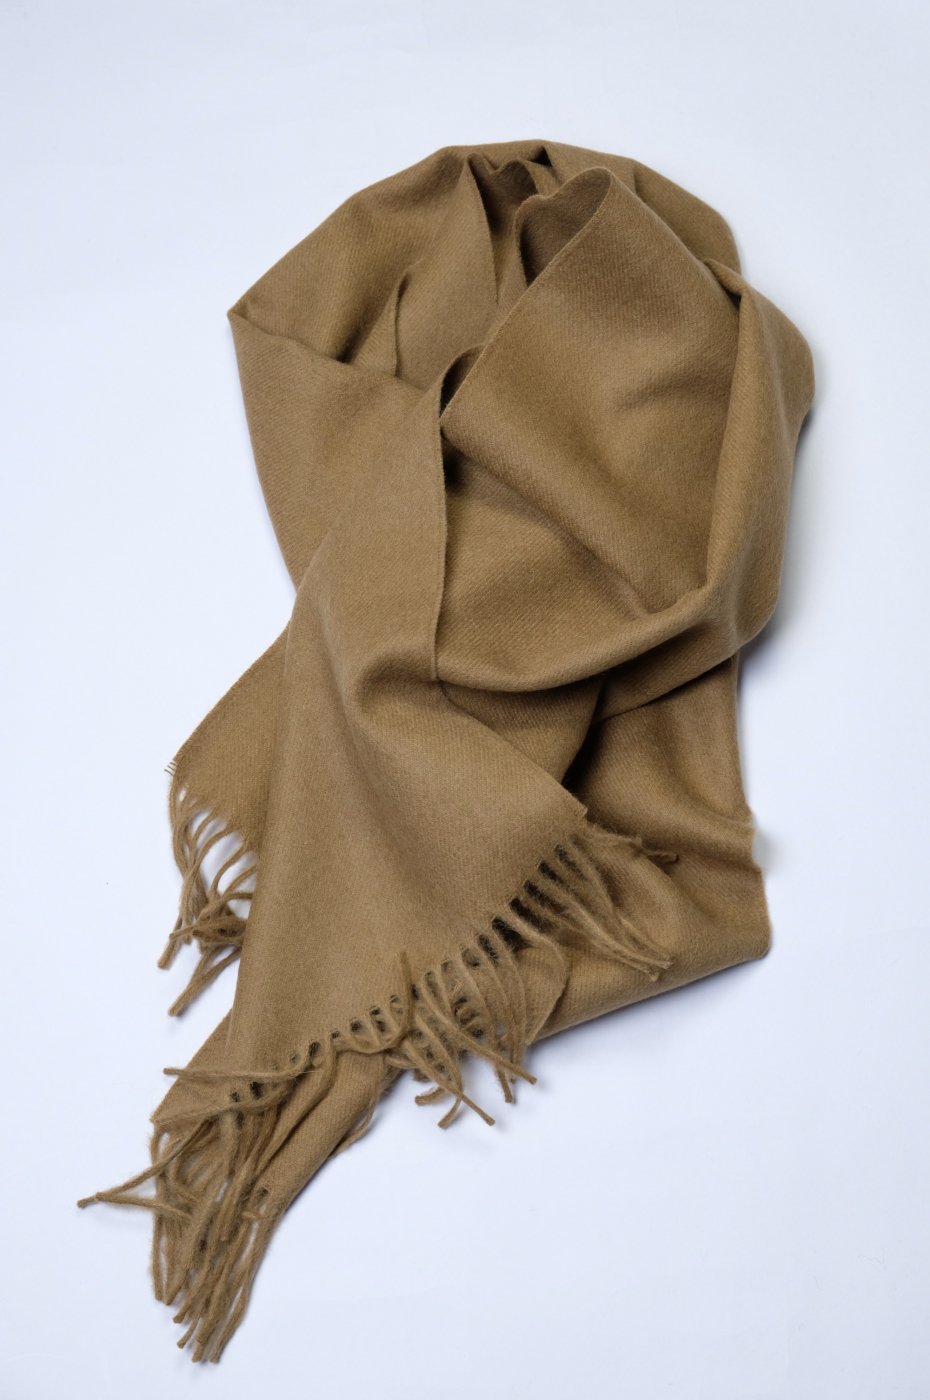 THE INOUE BROTHERS... "BRUSHED SCARF/CAMEL"